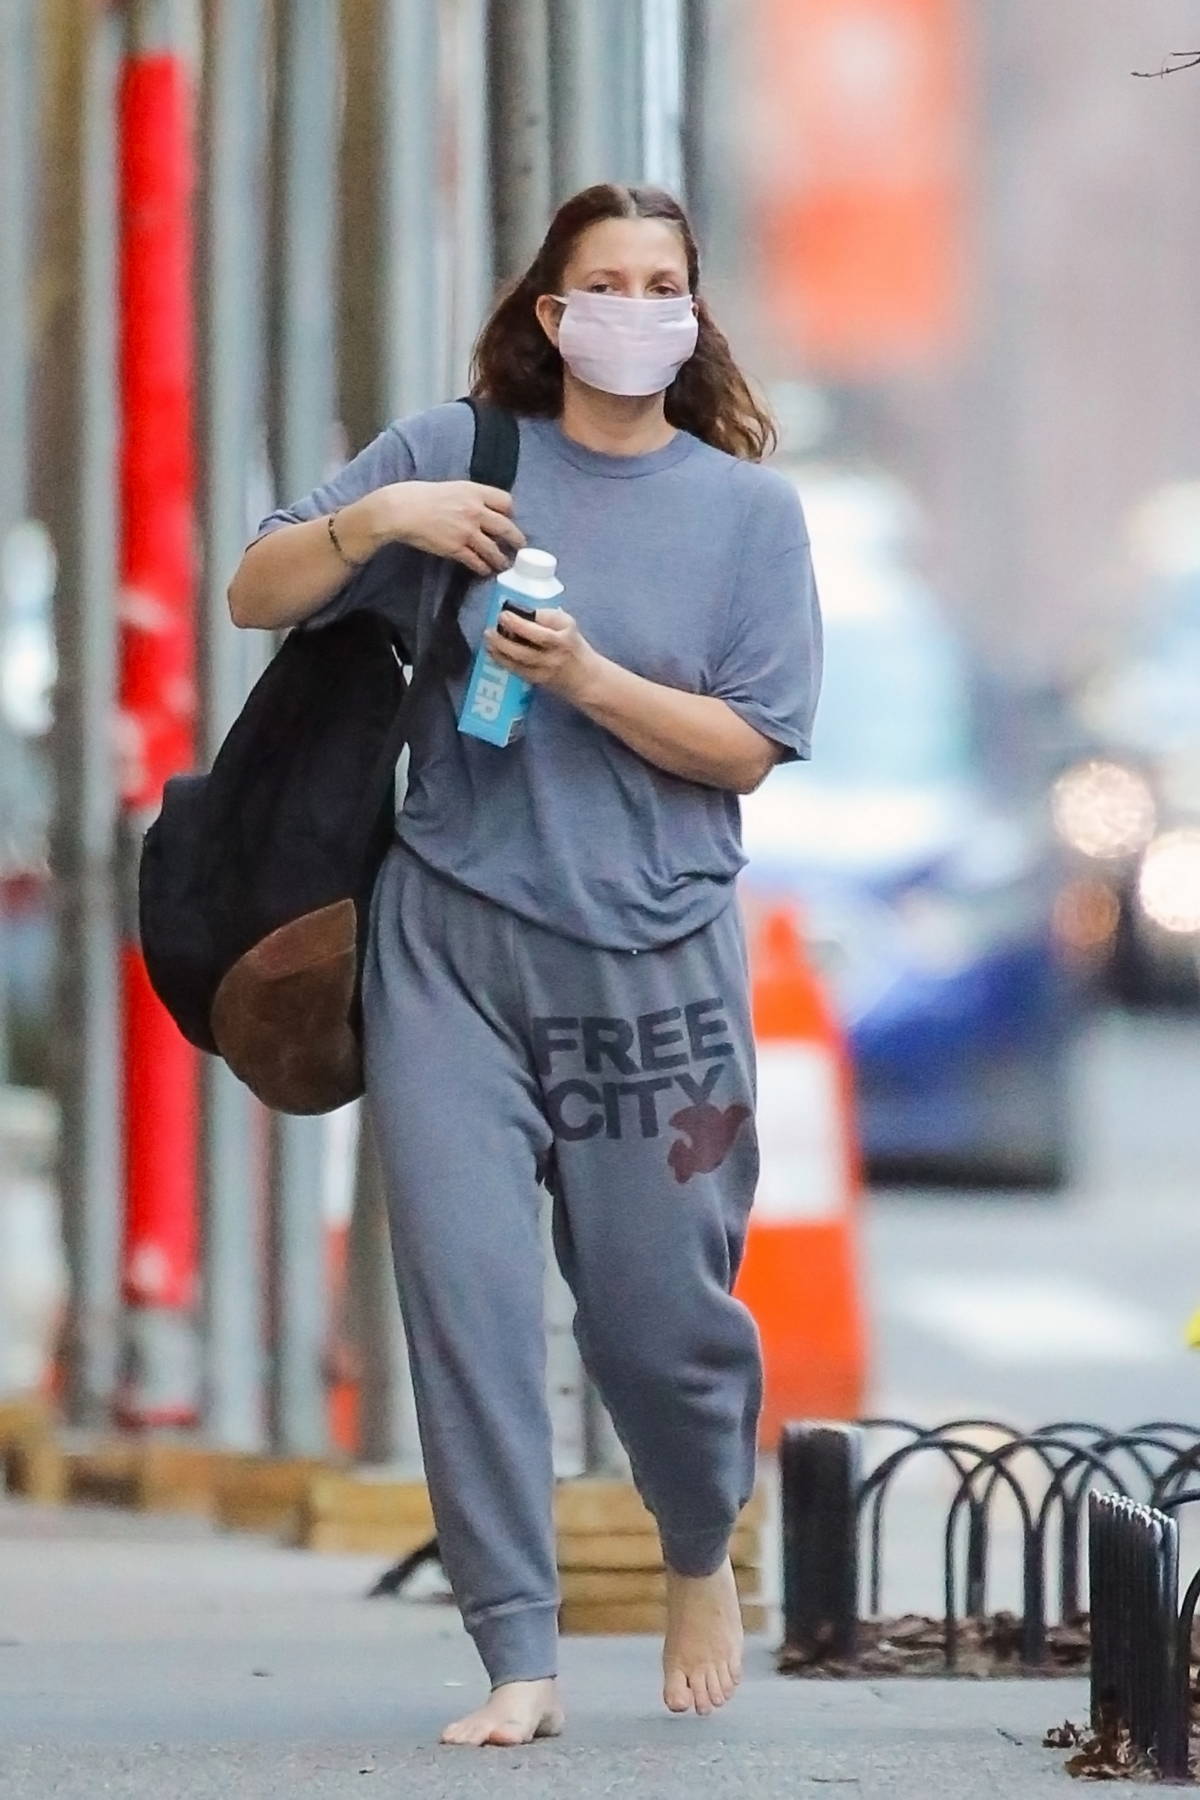 Drew Barrymore keeps things casual as she goes barefoot while out wearing a grey  sweatsuit in